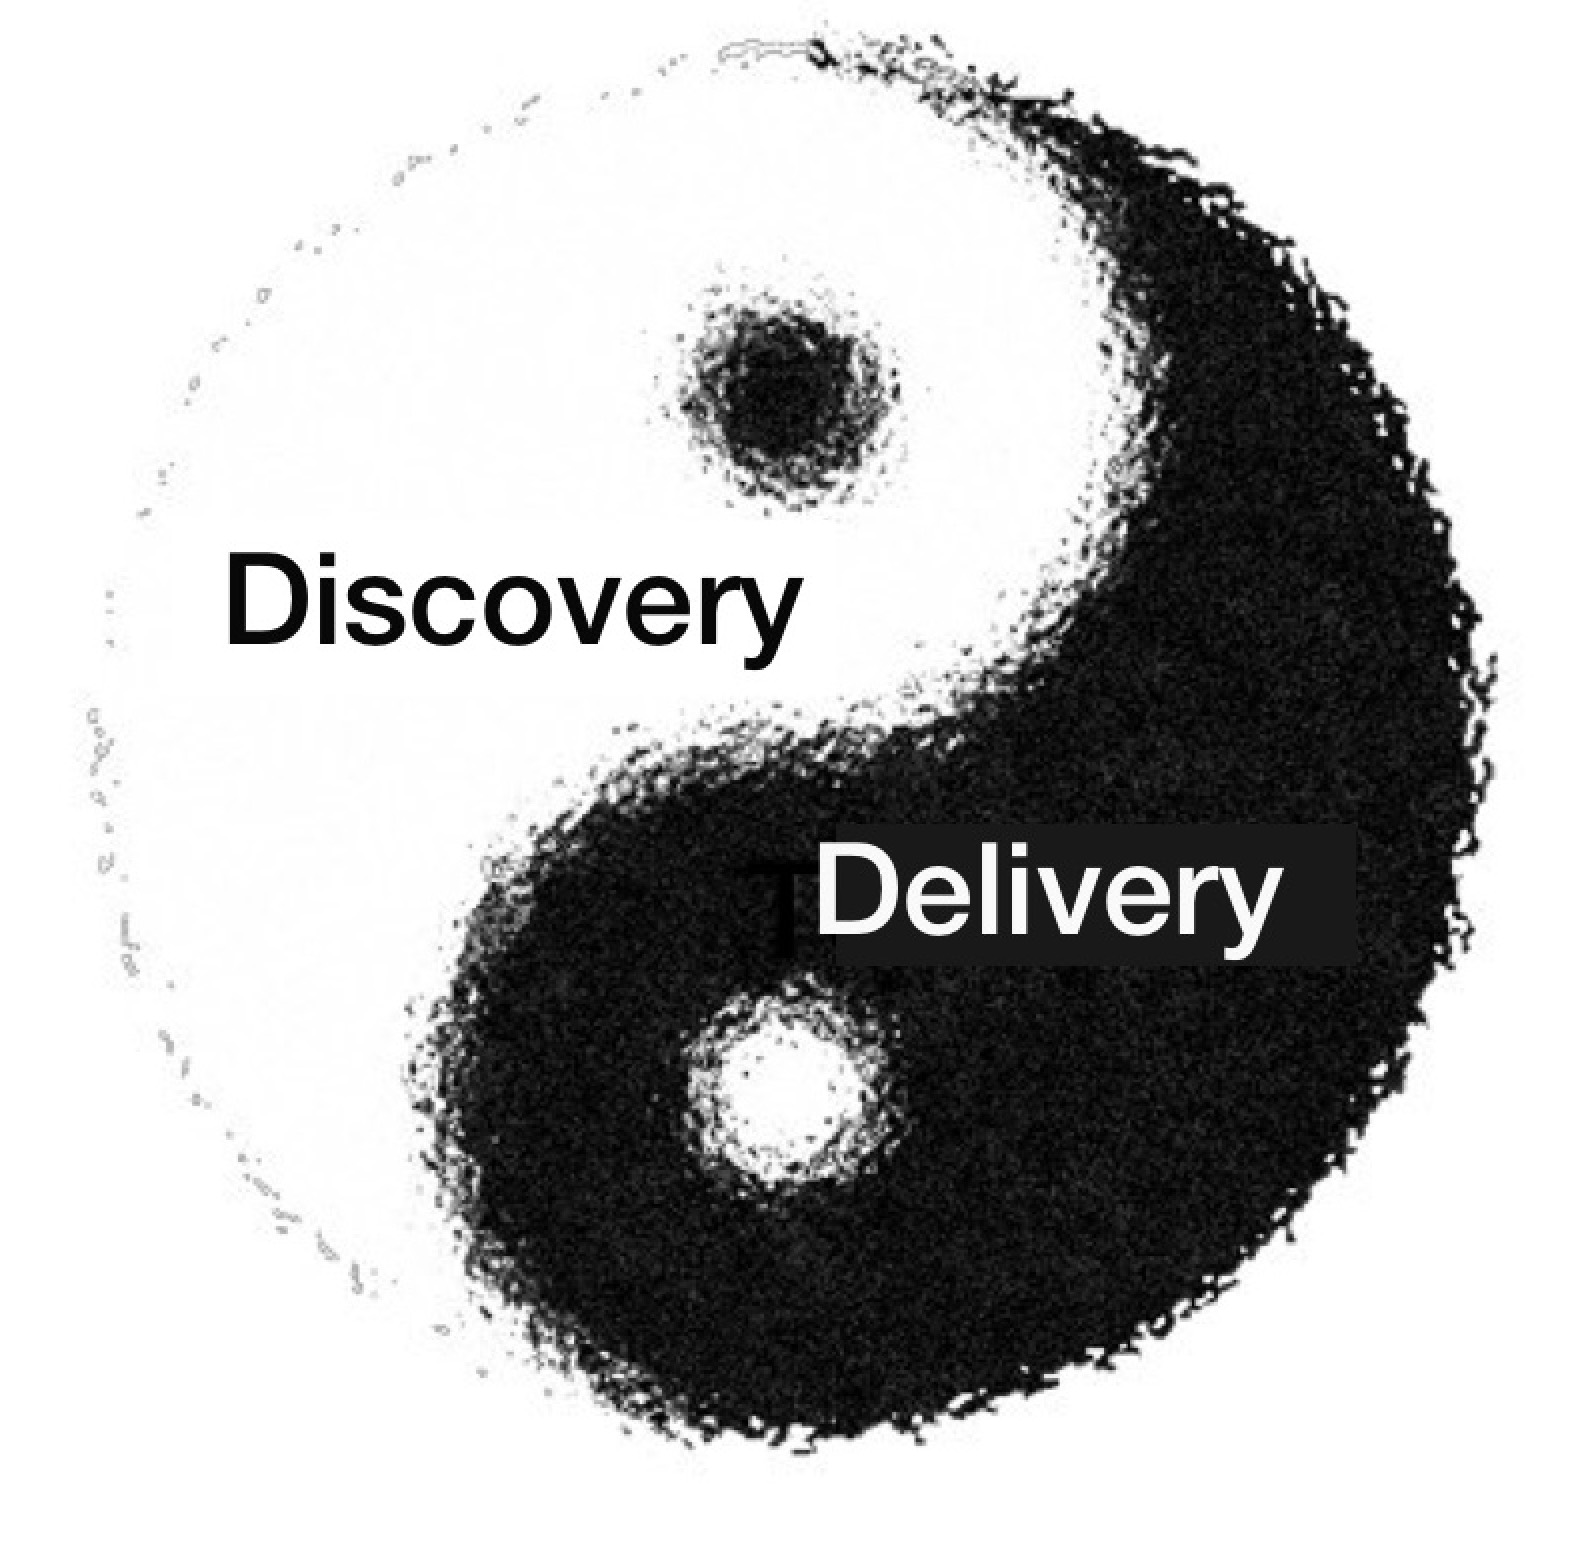 Discovery/Dilivery